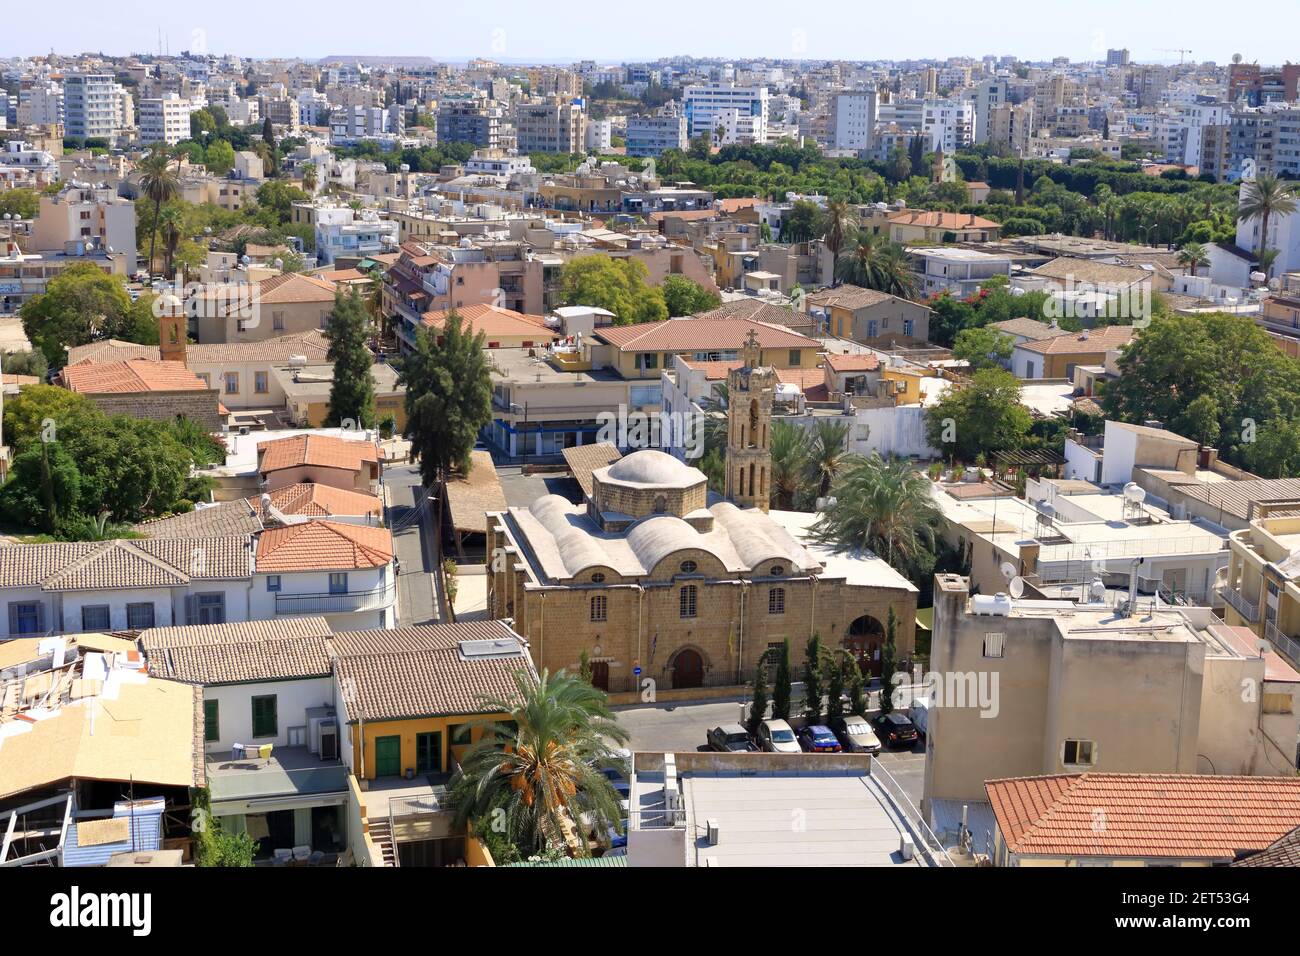 October 03 2020 - NICOSIA/Cyprus: View of Nicosia (Lefkosia), the last divided capital of the world from Shacolas (or 'Siakolas') tower, the eastern v Stock Photo